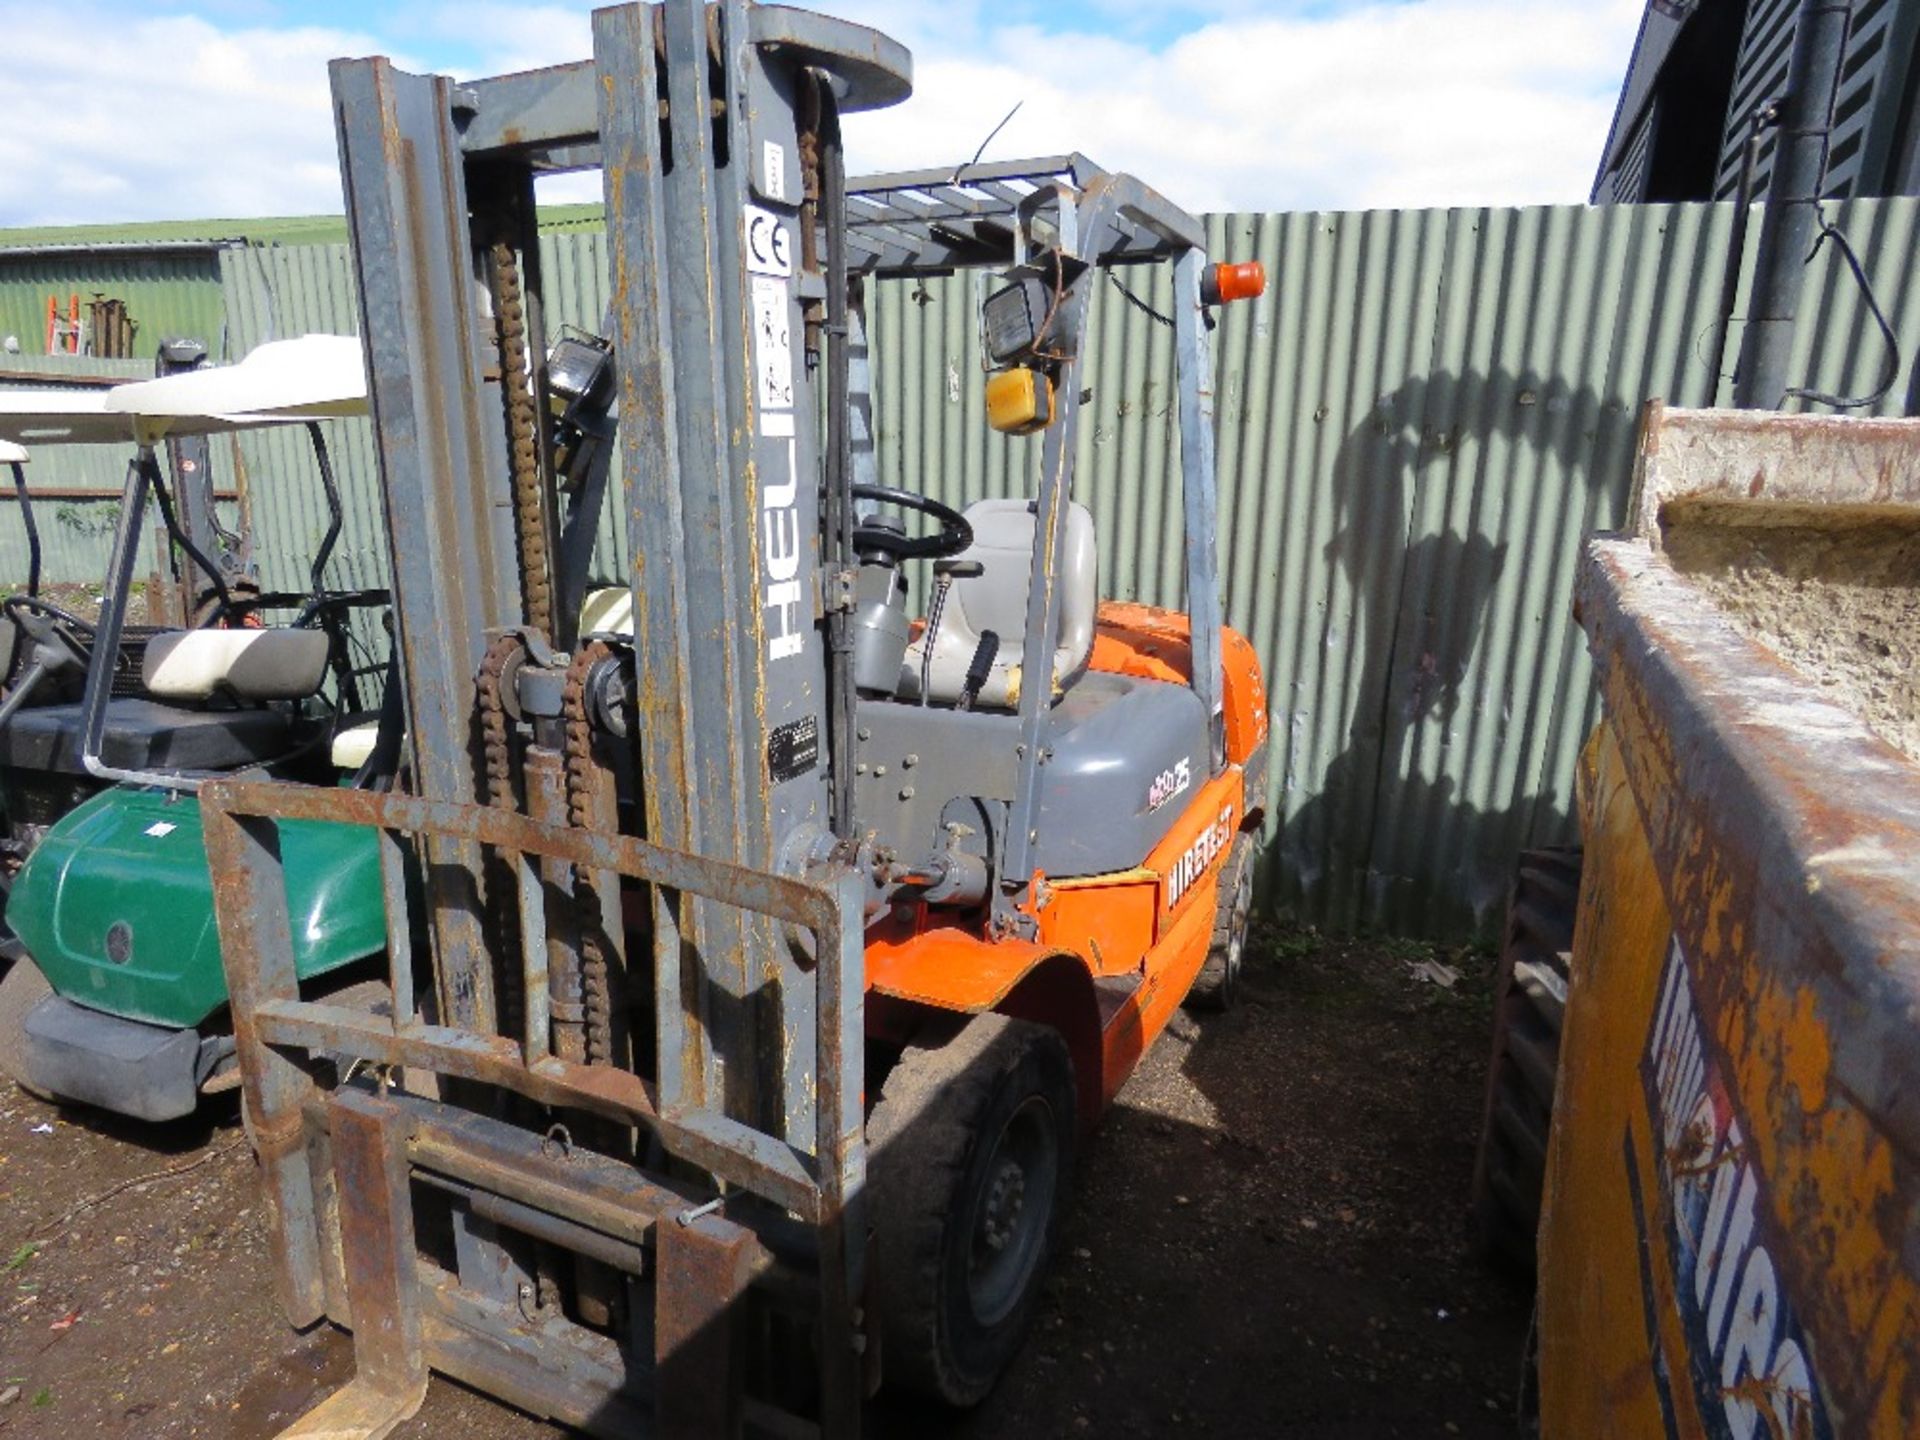 HELI CPCD25 DIESEL ENGINED FORKLIFT TRUCK WITH CONTAINER SPEC MAST/FREE LIFT. 2.5 TONNE LIFT CAPACIT